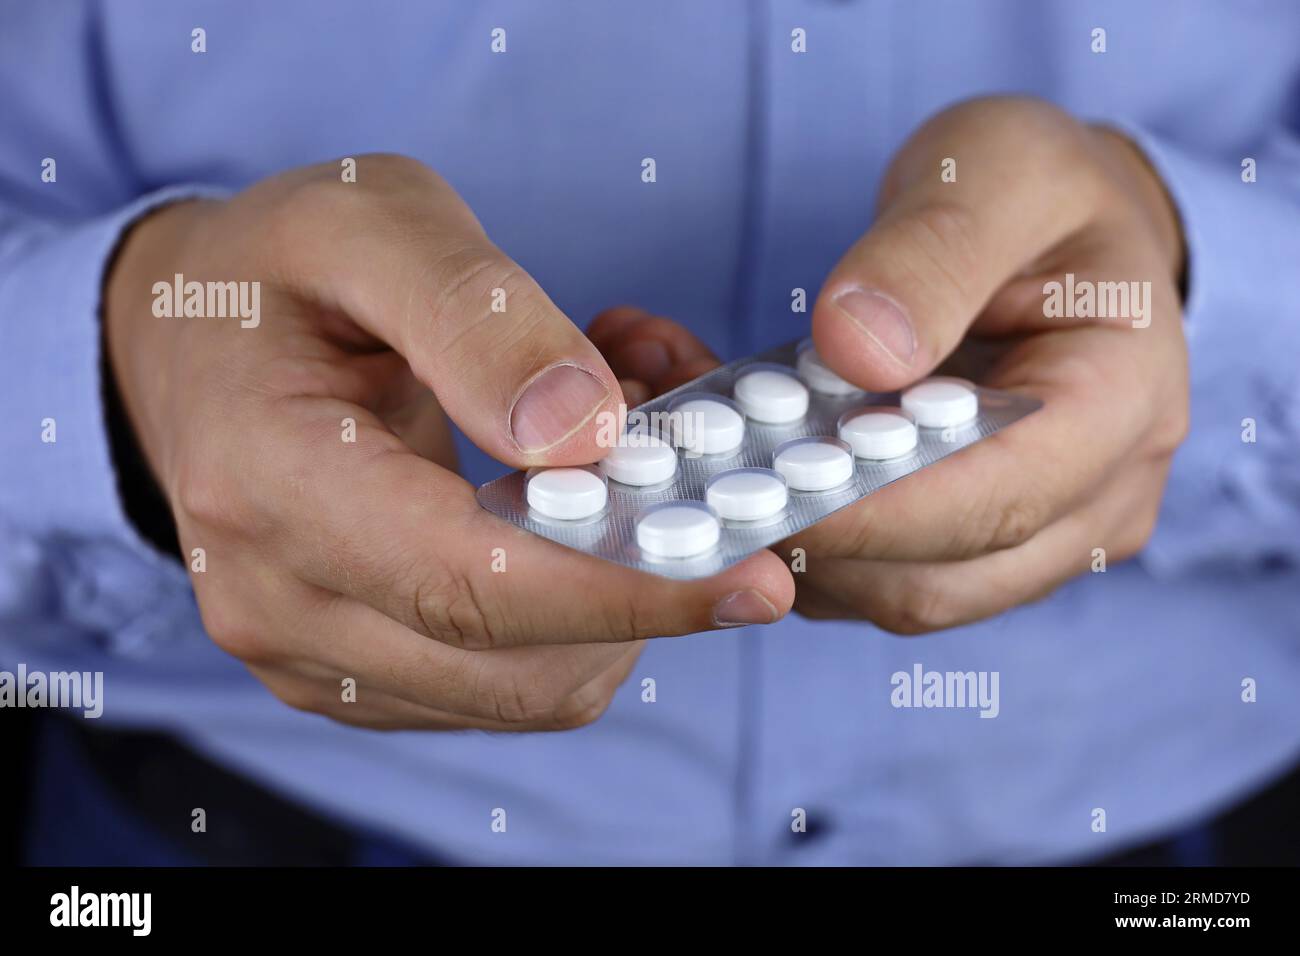 Man in office clothes taking pills, medication close up. Concept of antidepressant, stress at work, vitamins, dose of drugs Stock Photo